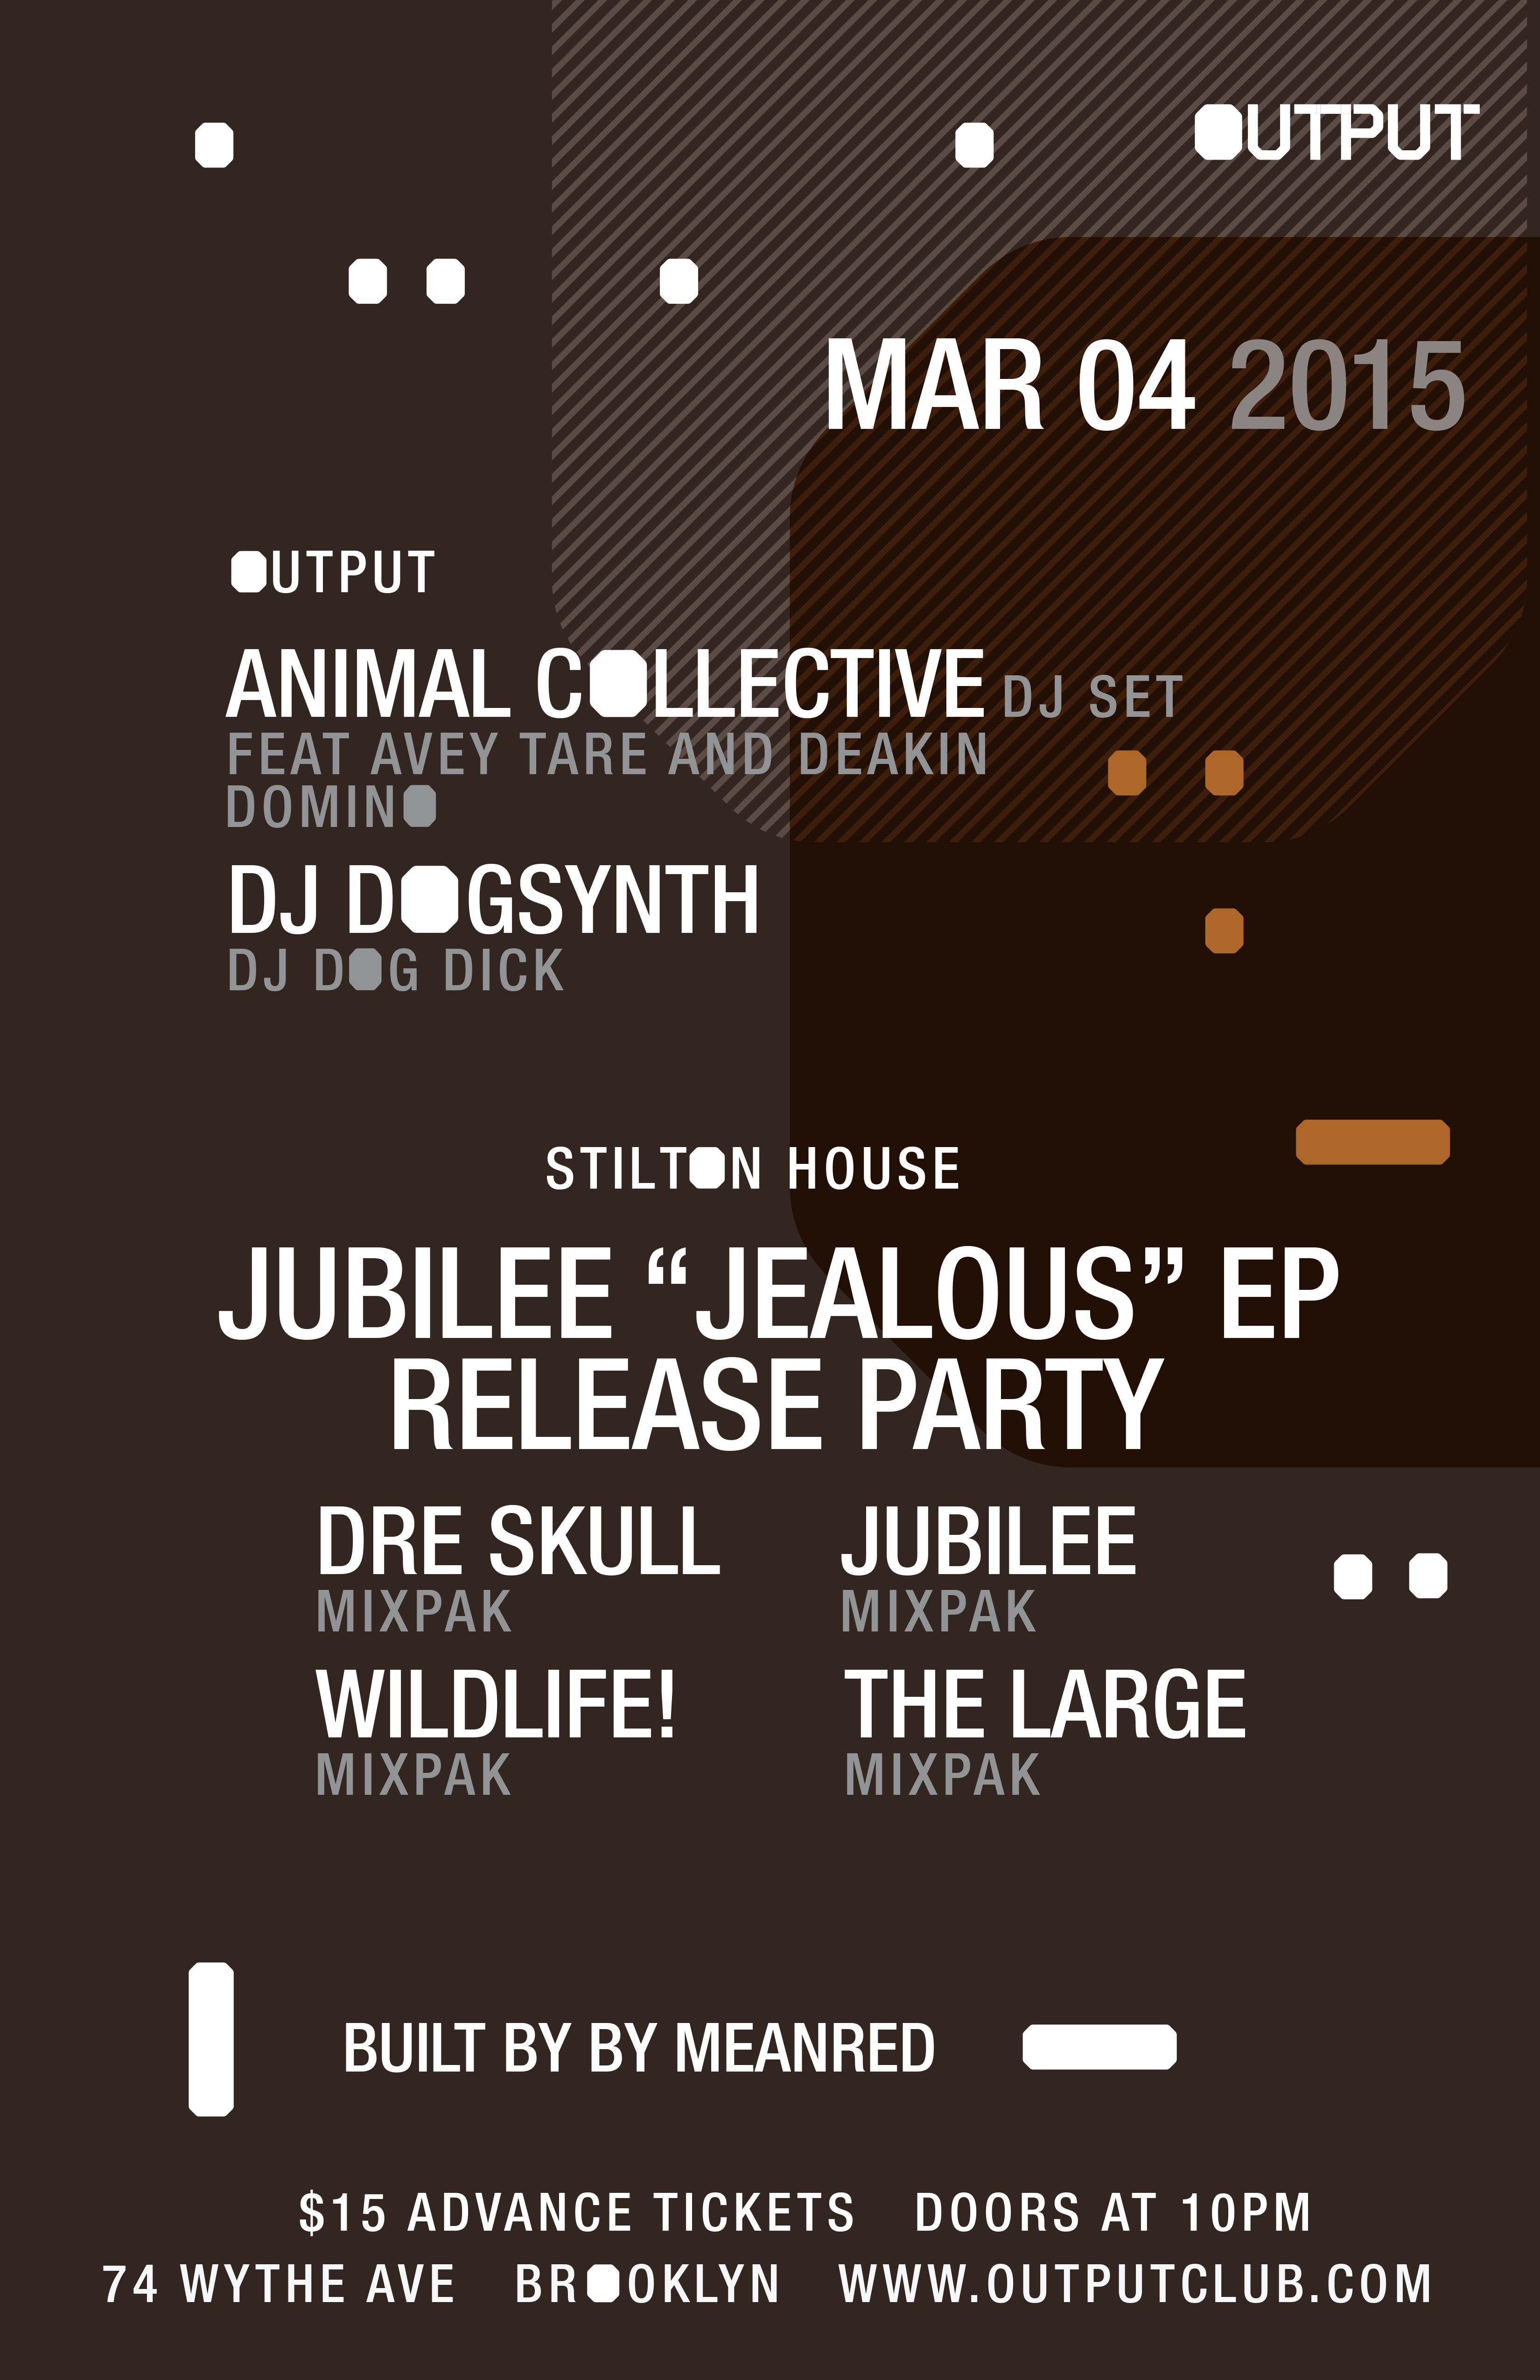 ANIMAL COLLECTIVE & HOLY GHOST! DJ SETS AT OUTPUT IN BROOKLYN: WIN TICKETS